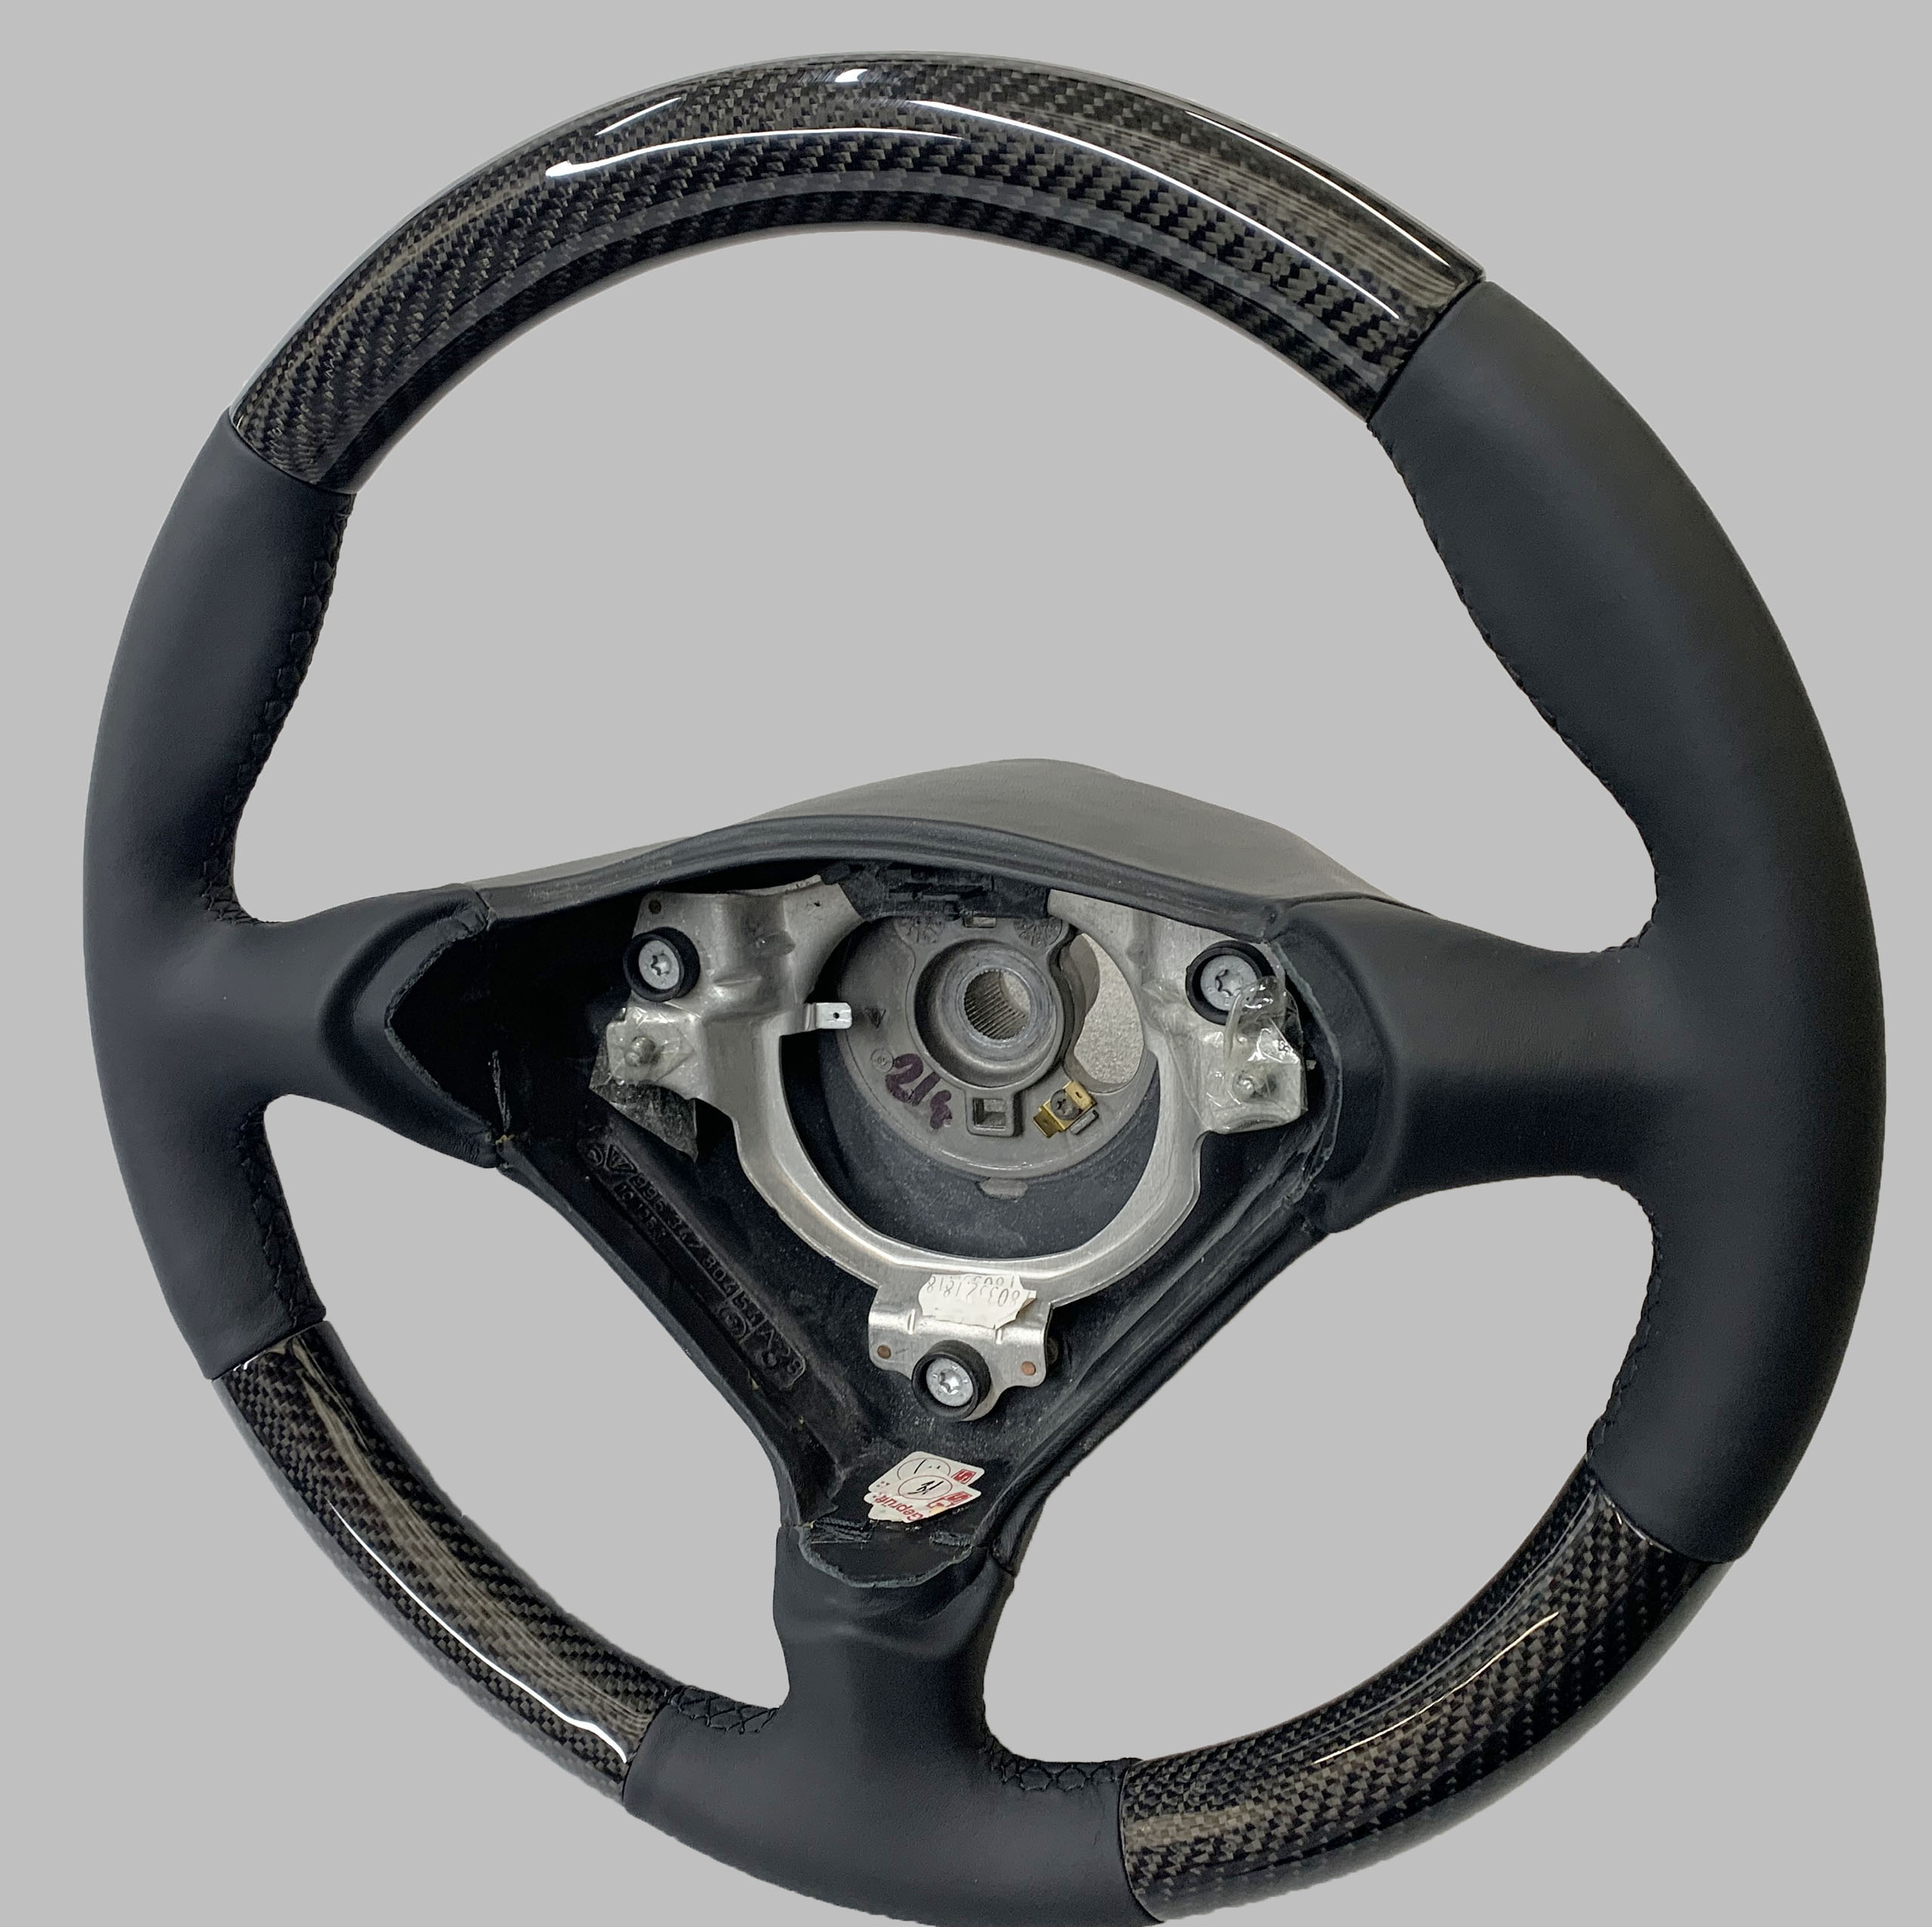 Porsche 986 996 carbon fibre steering wheel in black leather with black stitching